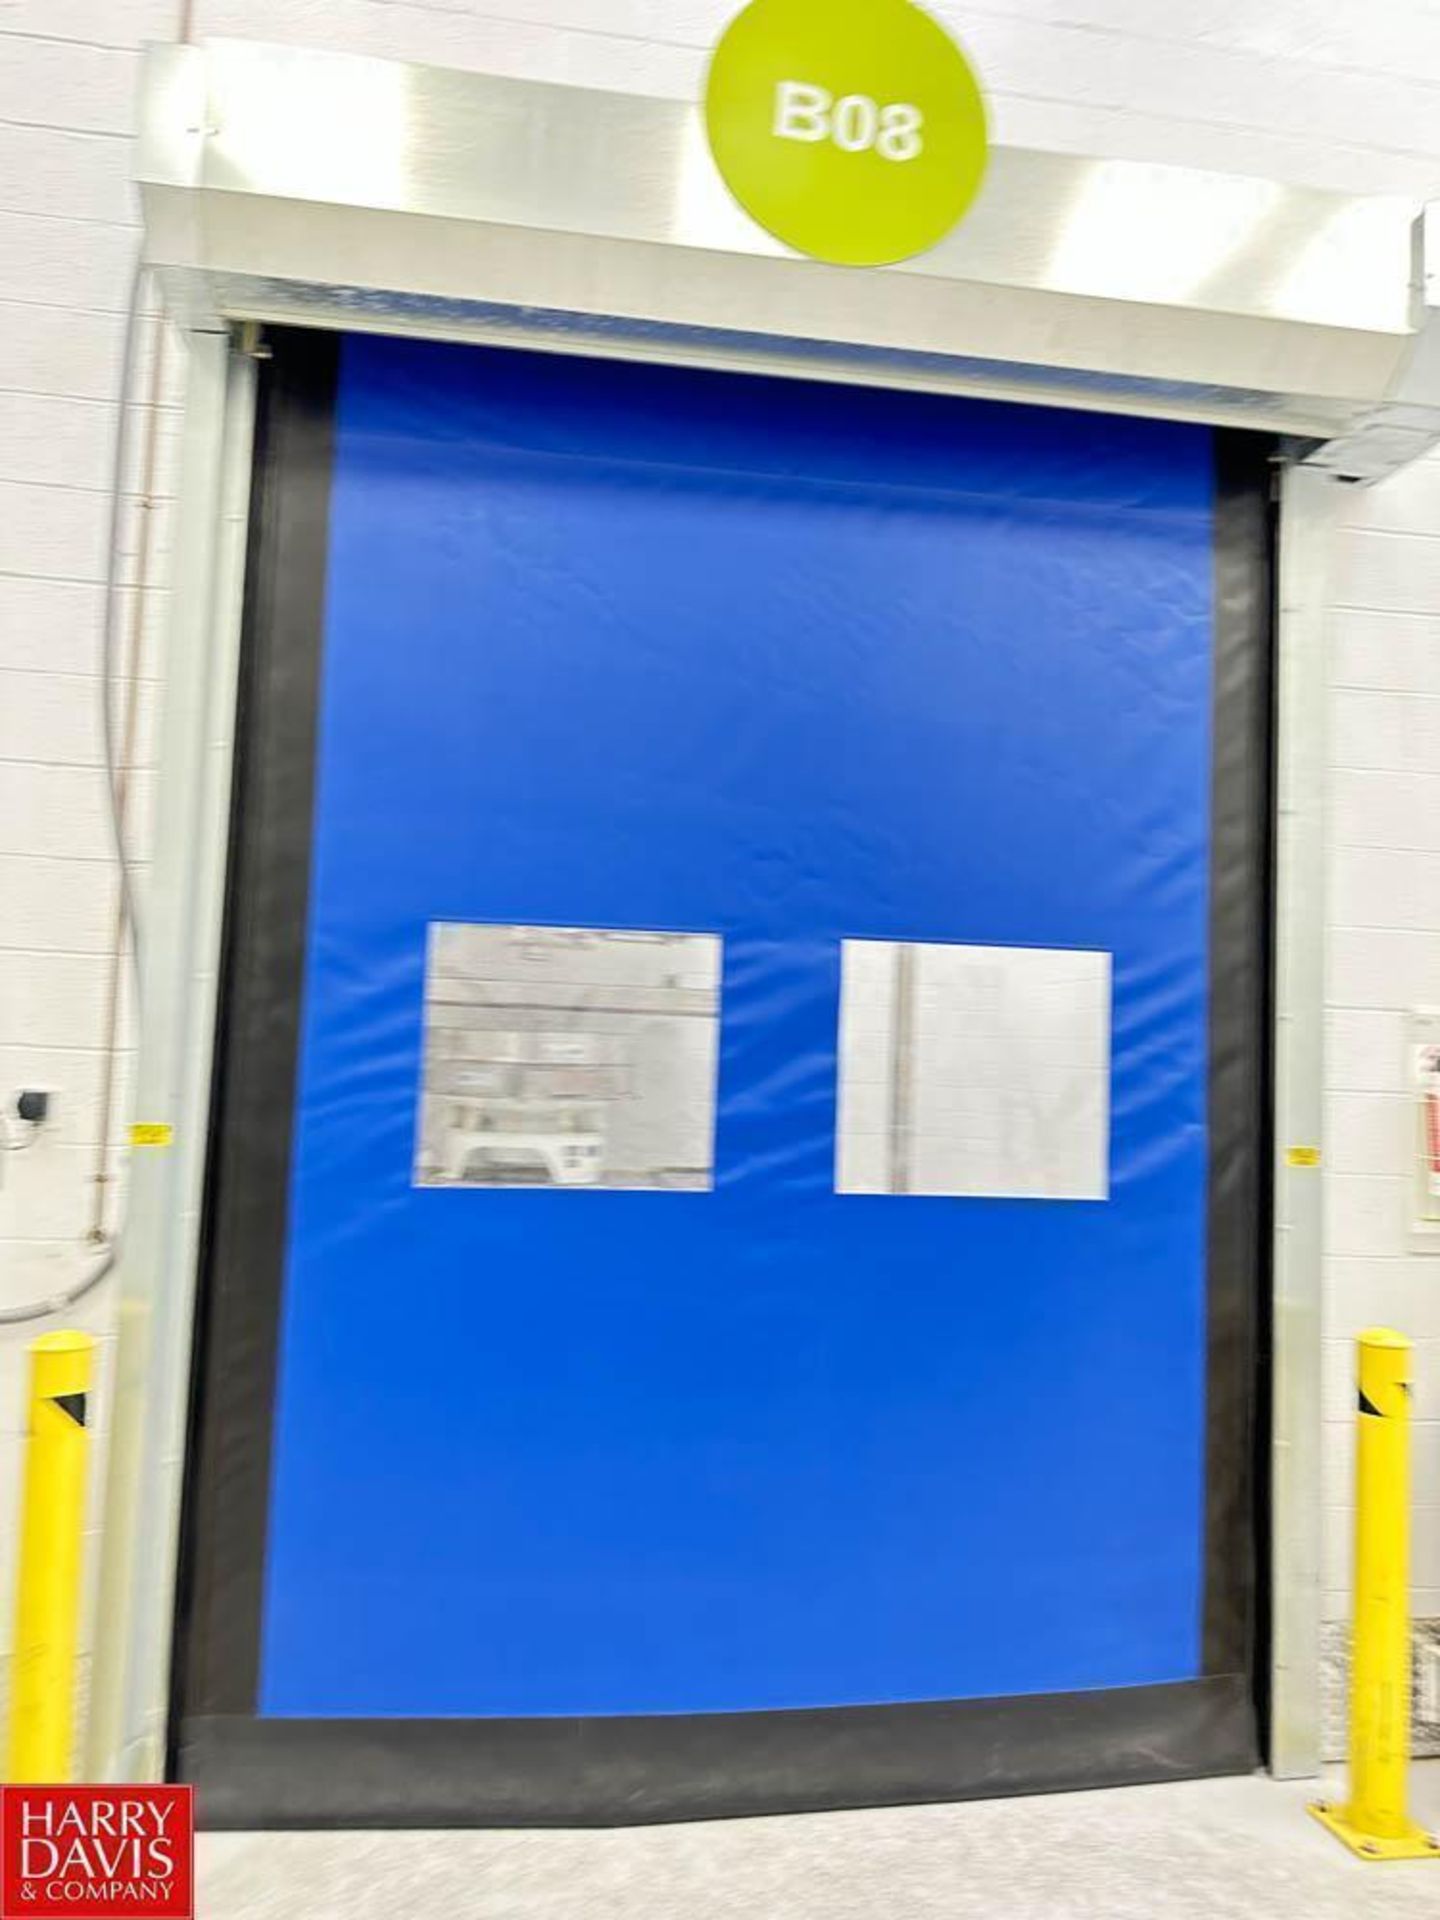 High Speed Roll-Up Door, Dimensions = 97" Width x 117" Length - Rigging Fee: $1250 - Image 2 of 4